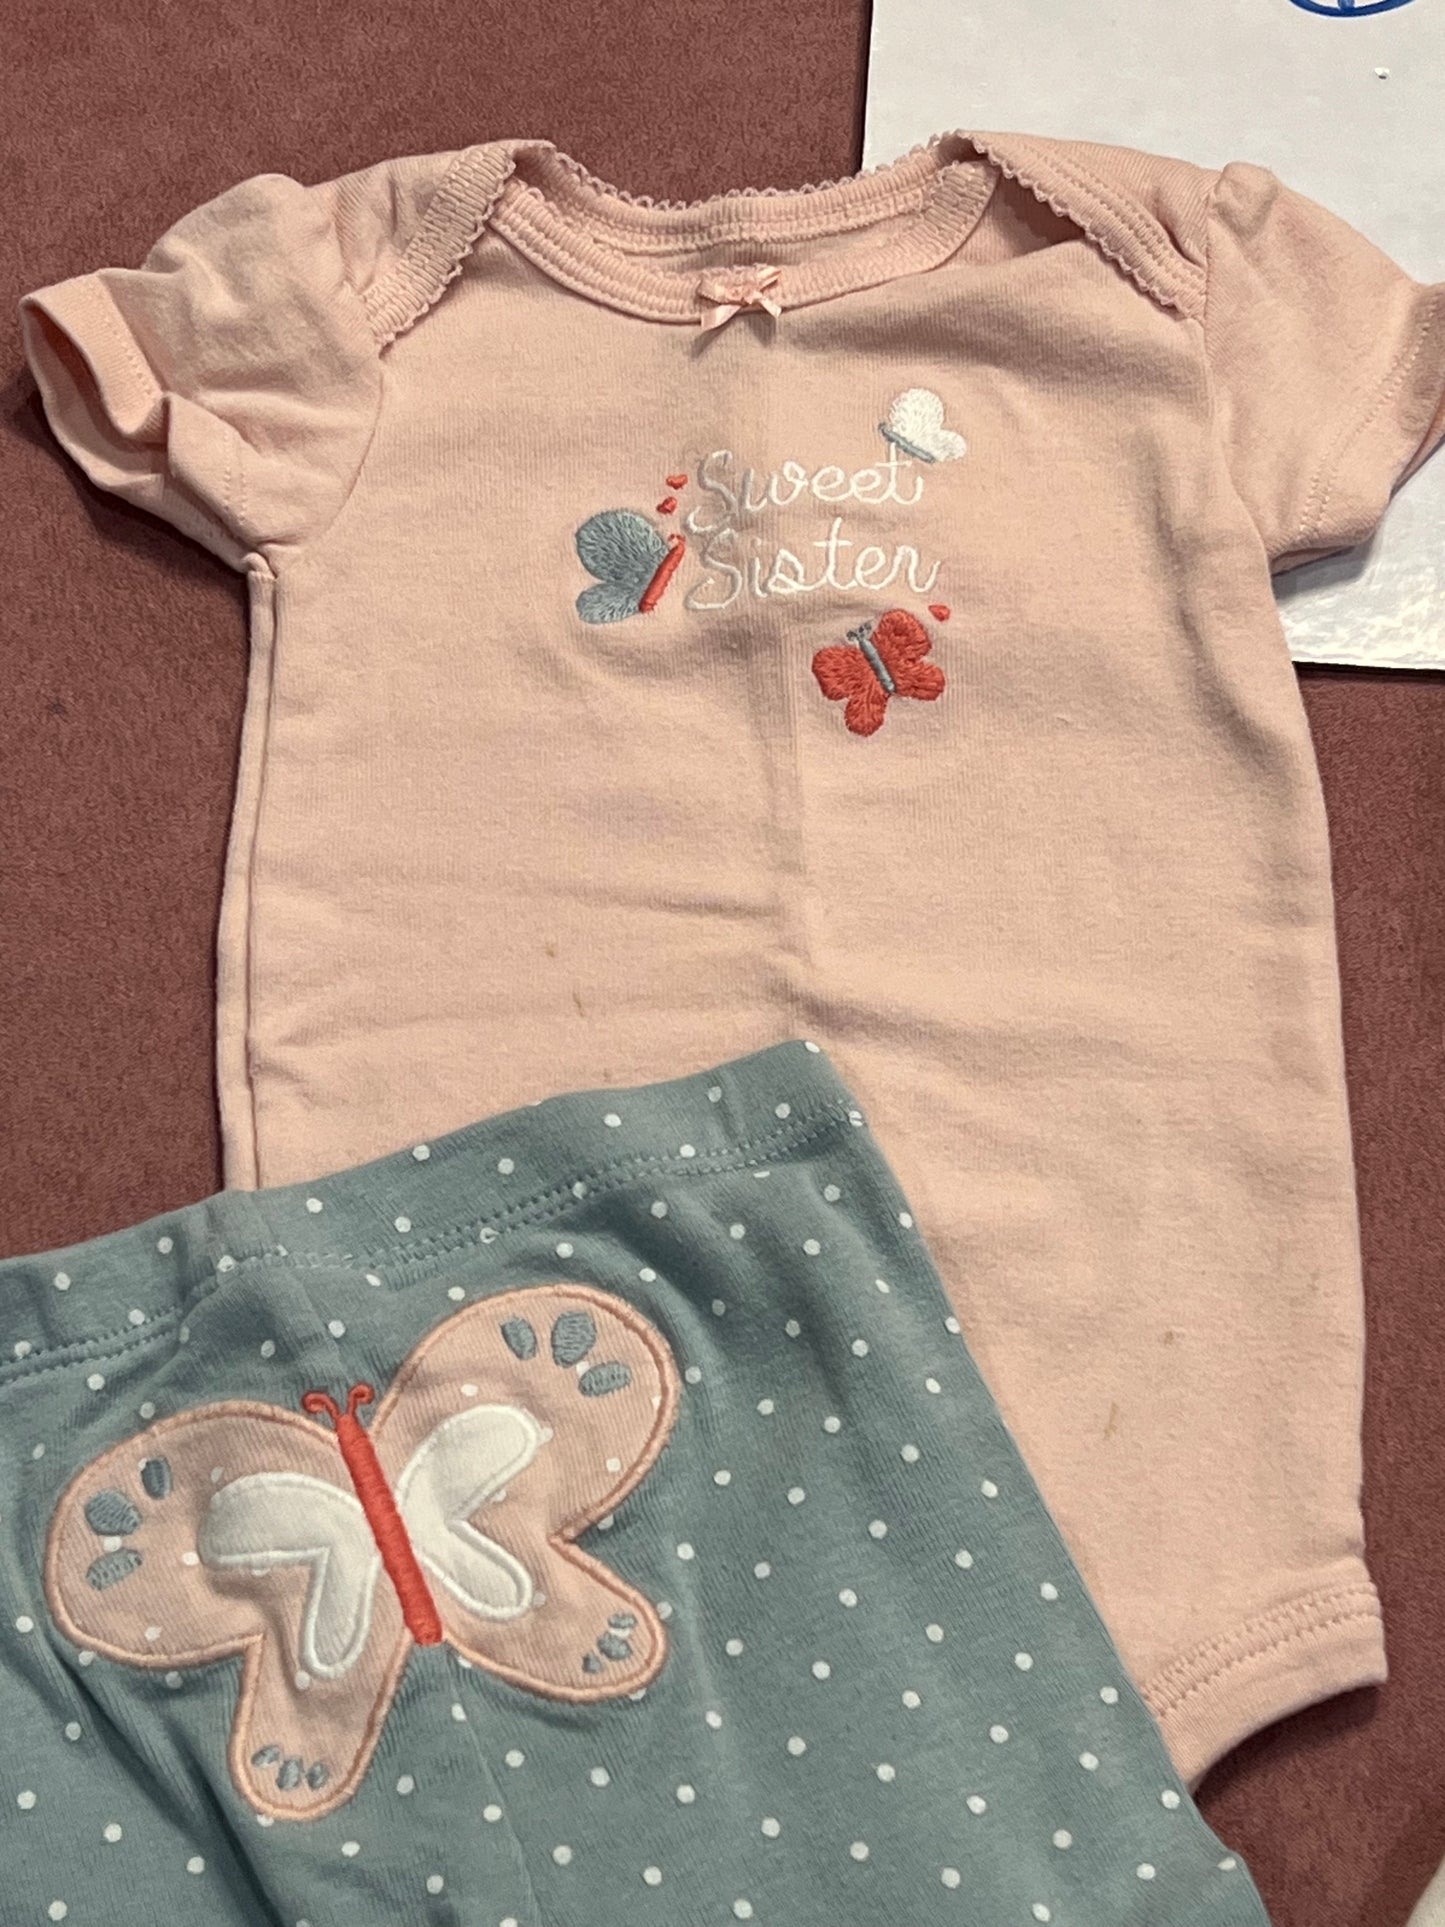 6 month girls outfit set (5)